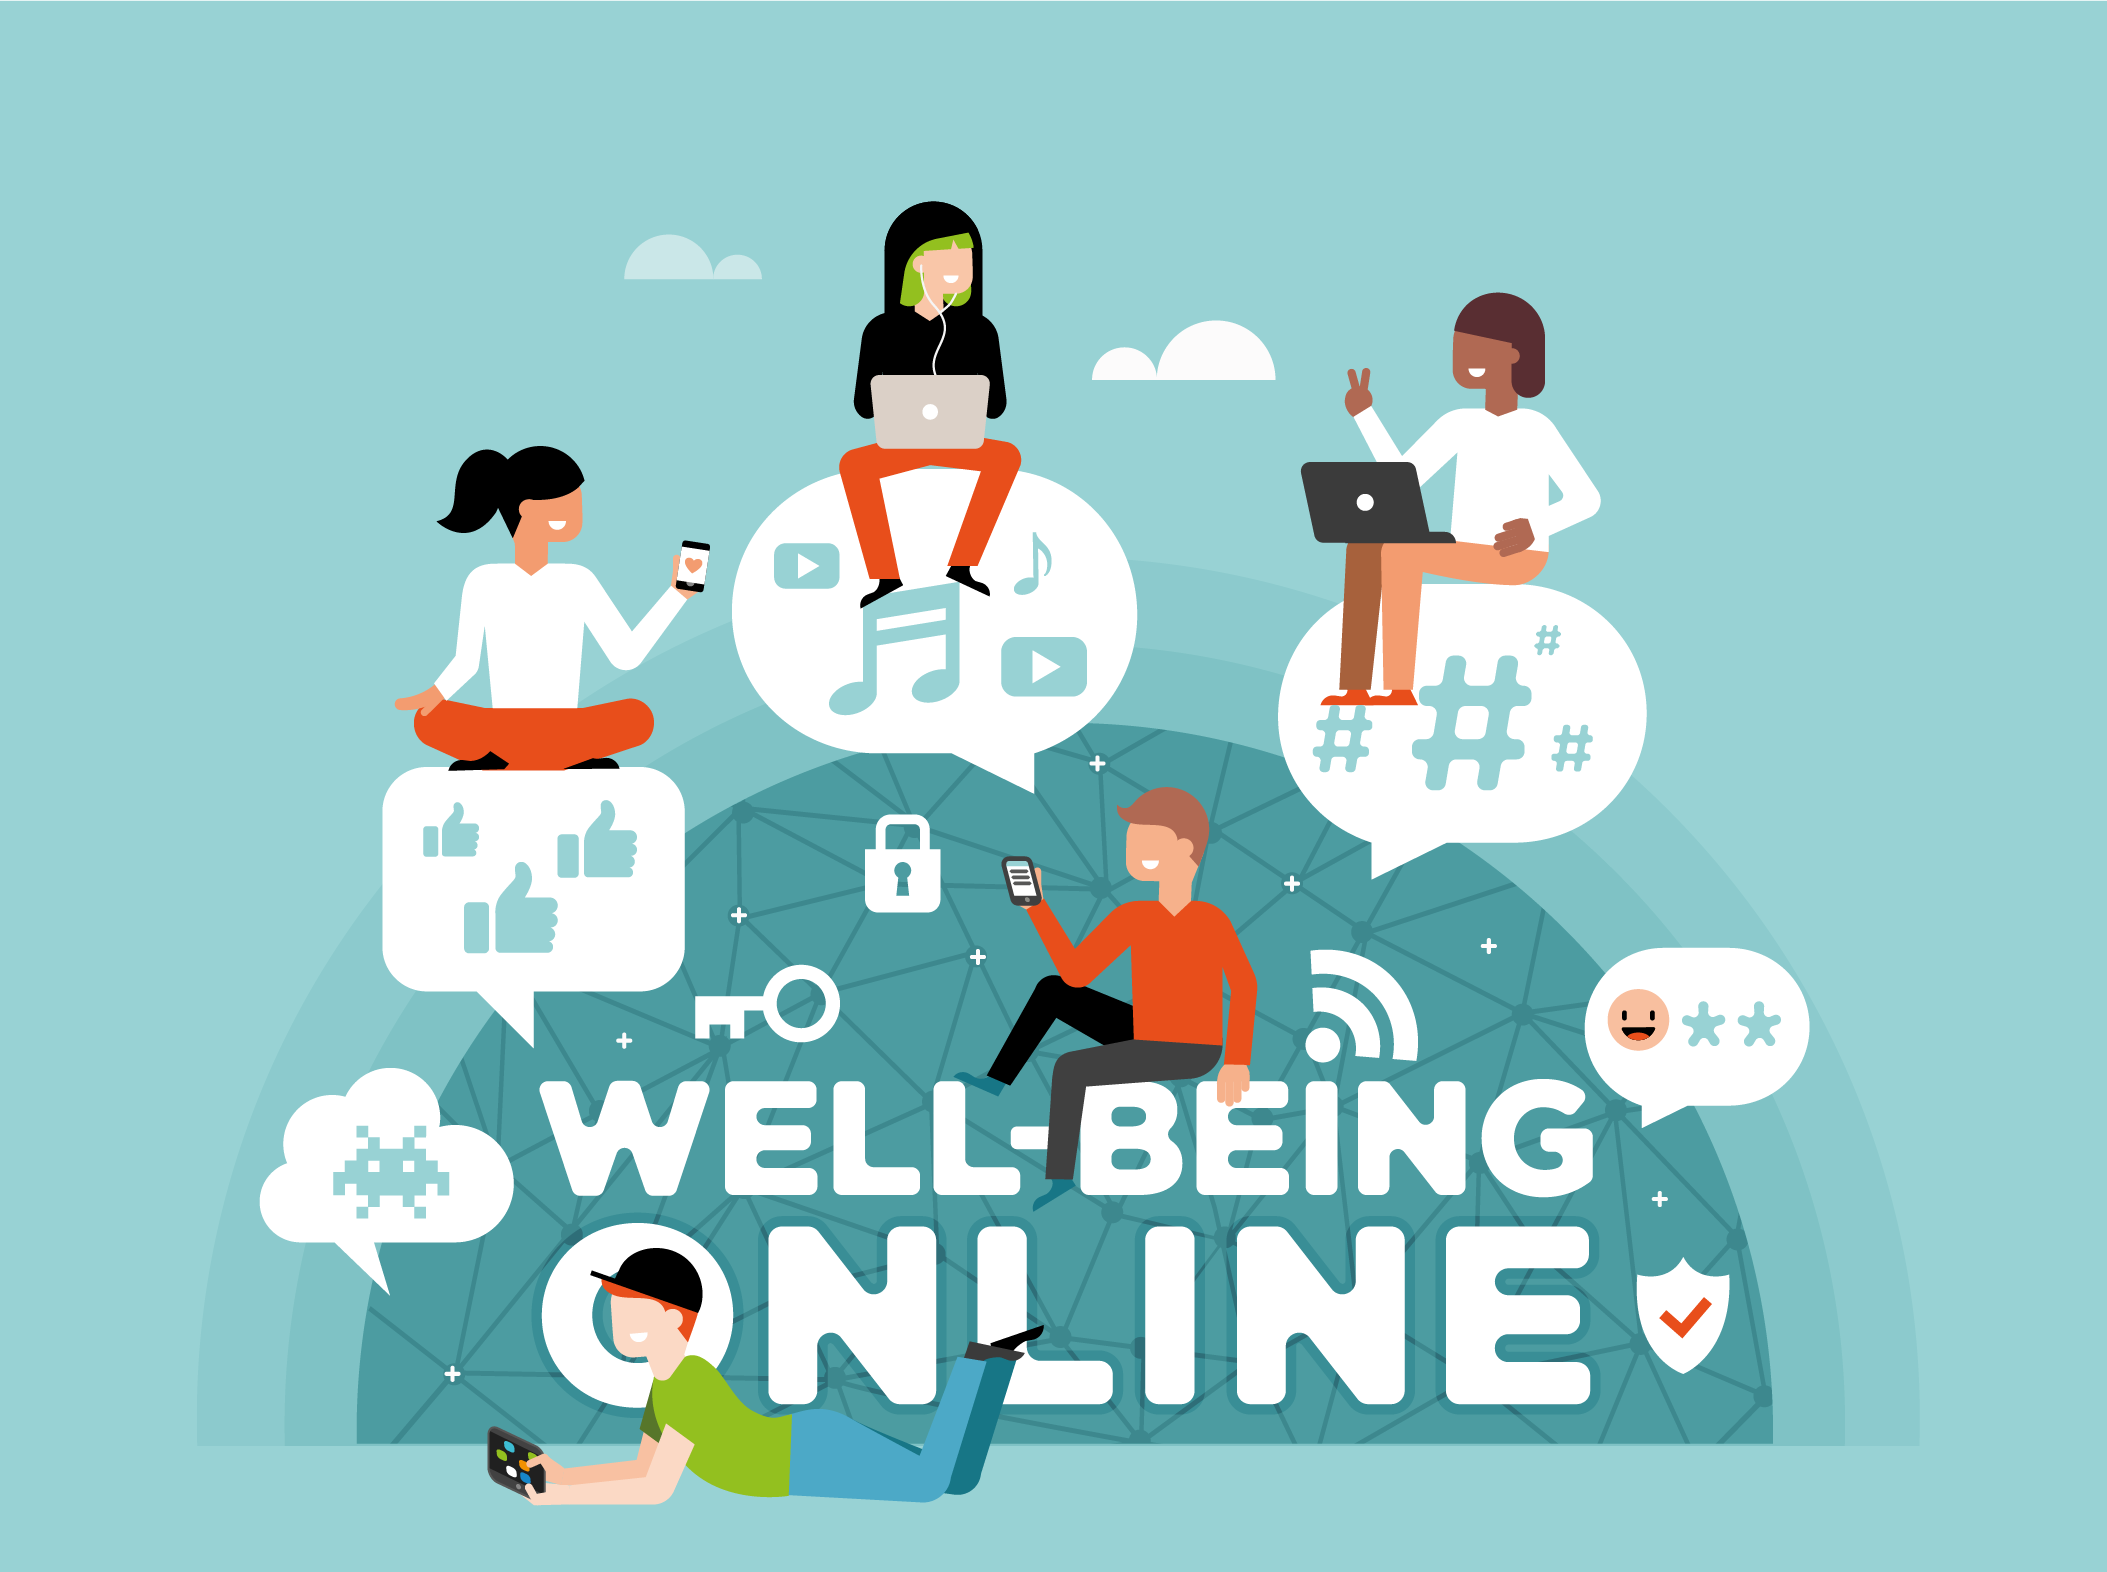 Well-being online